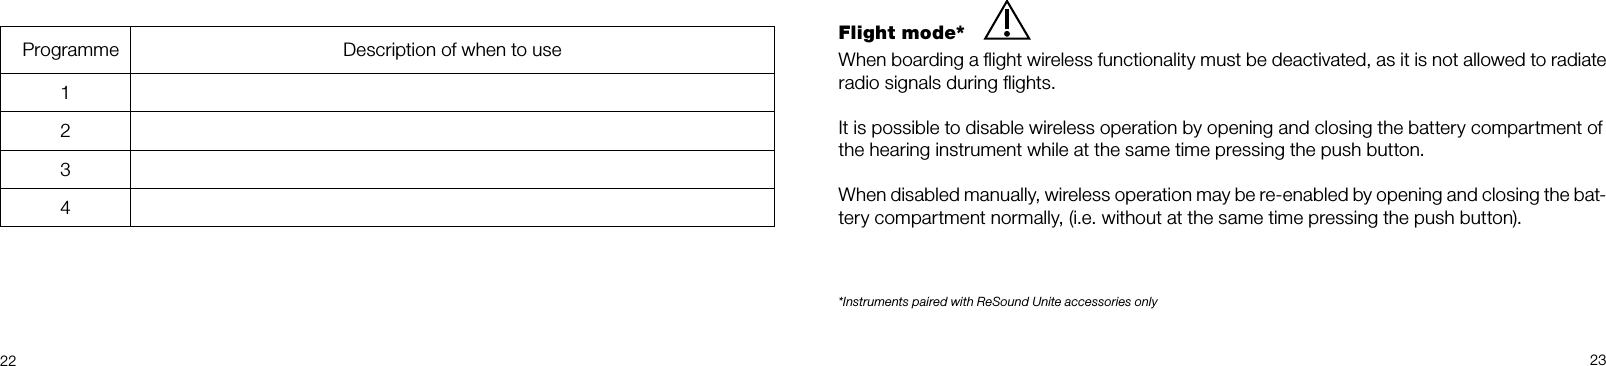  22 23Flight mode*When boarding a ﬂight wireless functionality must be deactivated, as it is not allowed to radiate radio signals during ﬂights.It is possible to disable wireless operation by opening and closing the battery compartment ofthe hearing instrument while at the same time pressing the push button.When disabled manually, wireless operation may be re-enabled by opening and closing the bat-tery compartment normally, (i.e. without at the same time pressing the push button).*Instruments paired with ReSound Unite accessories only  Programme Description of when to use1234